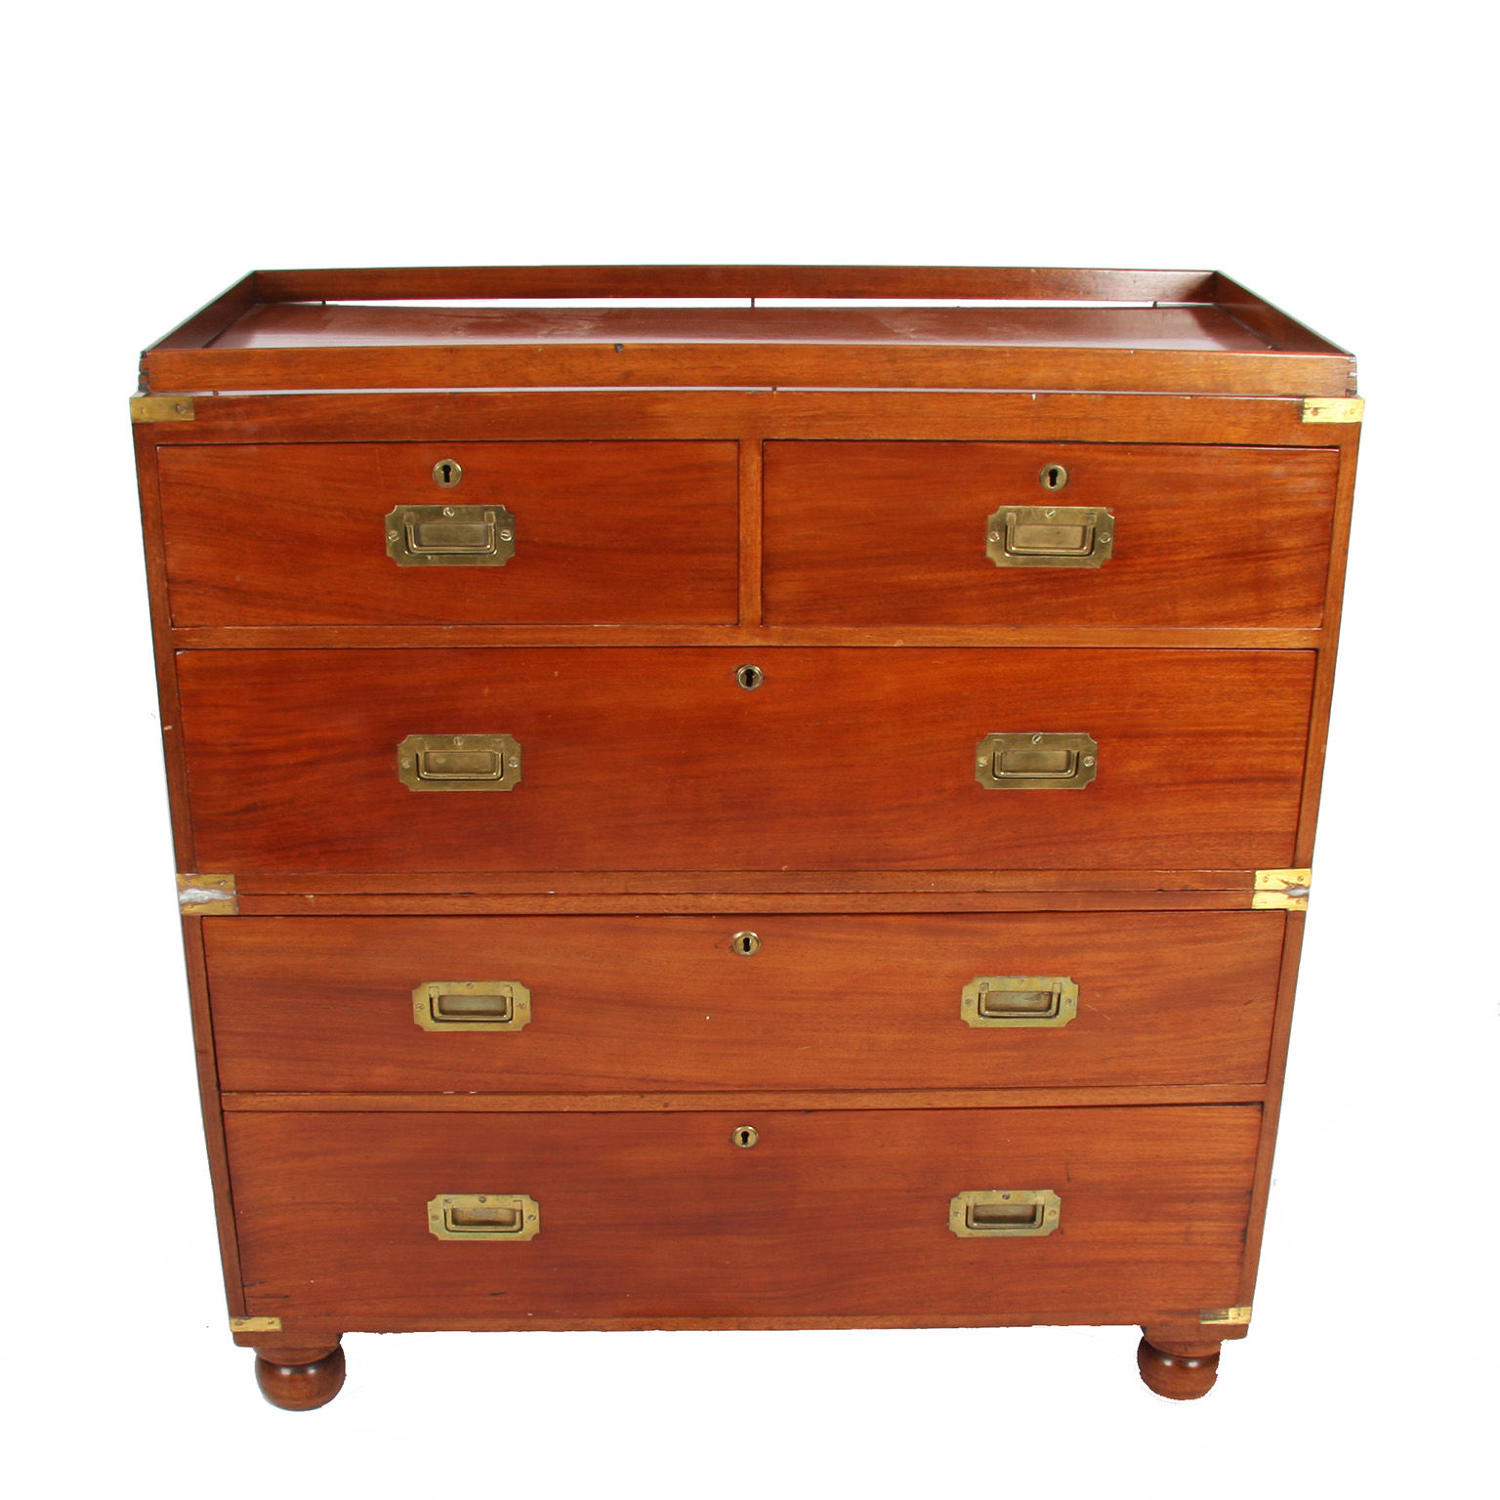 Mahogany Campaign Chest with Brass Details